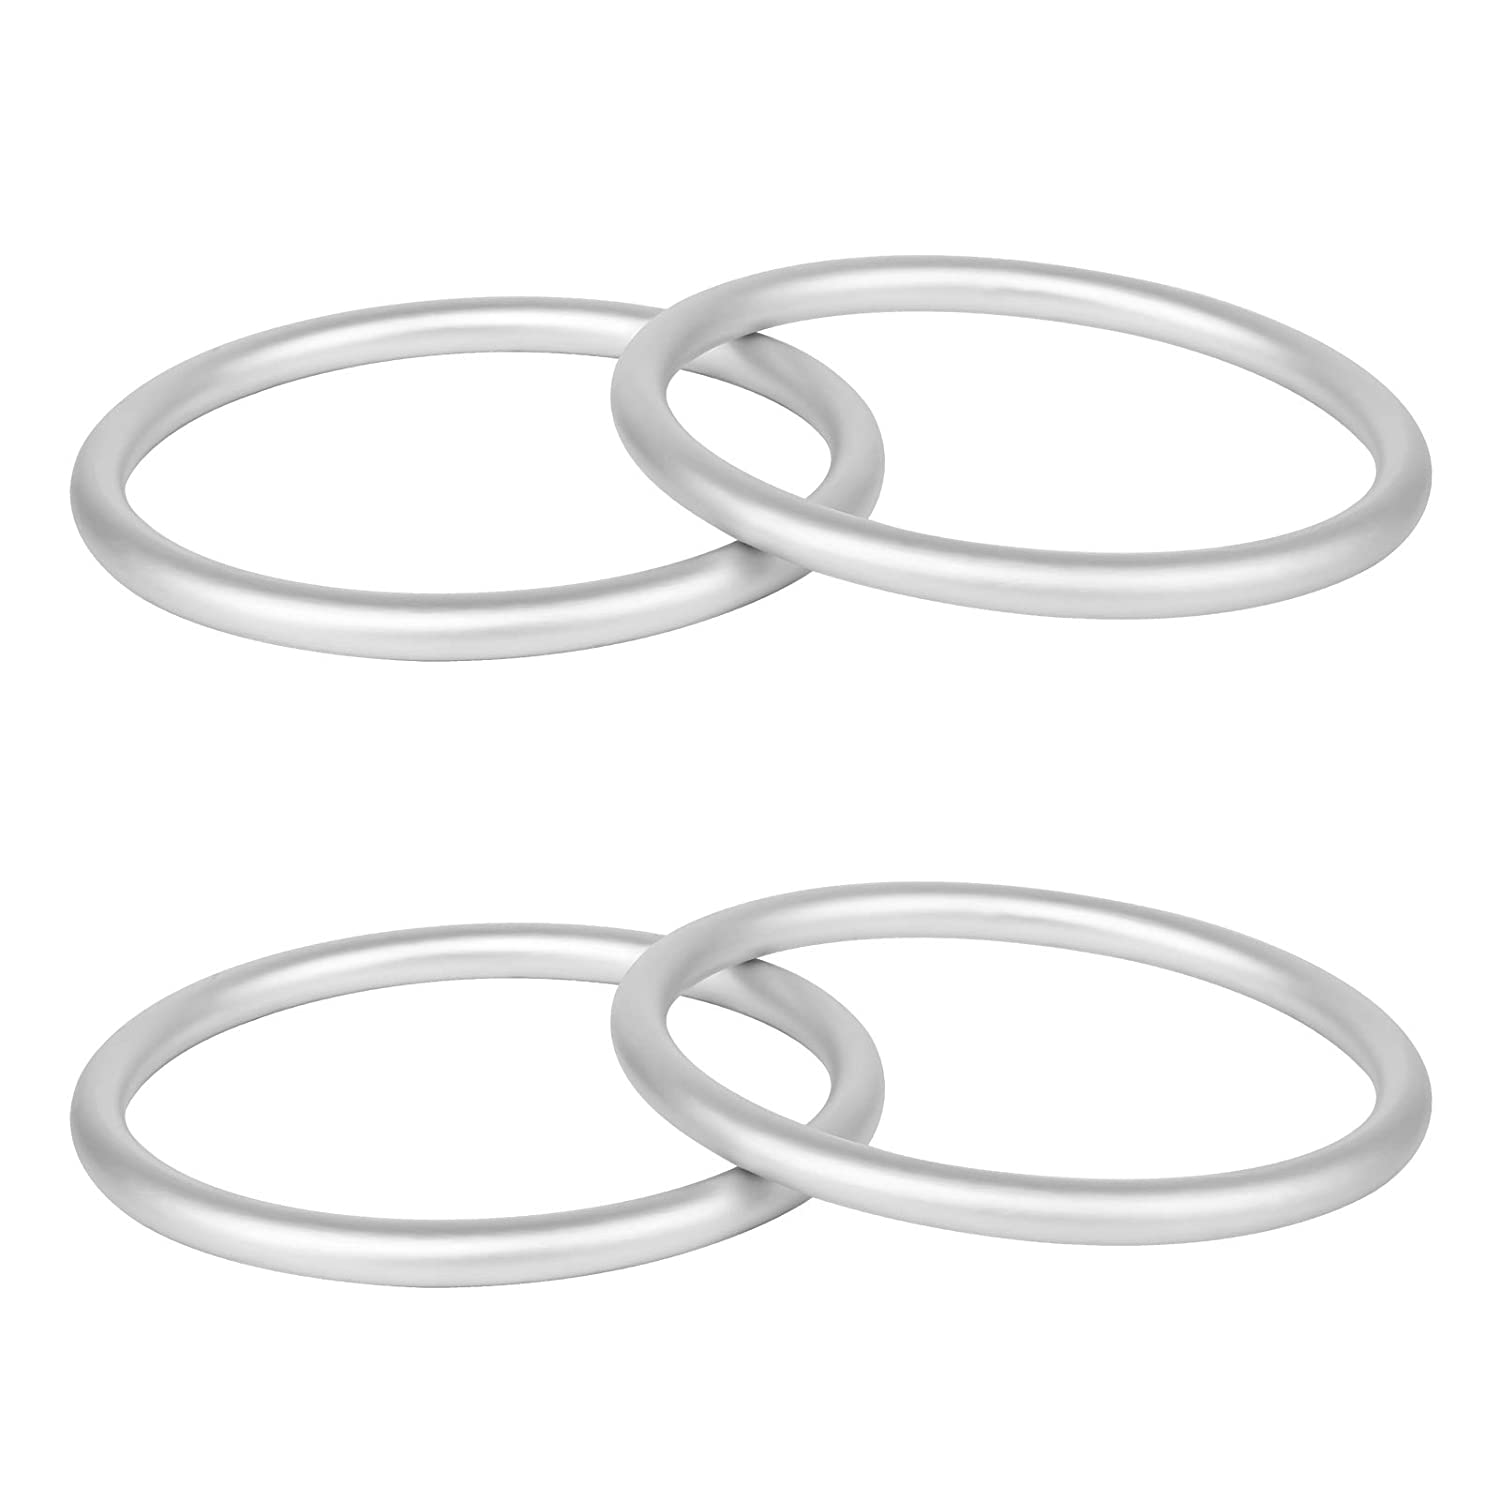 Jubaopen Baby Sling Rings Pack of 4 Carry Straps Rings Cotton Wrap Aluminium Rings Carry Strap for Use with Baby Sling Ring Accessories for Toddlers (Silver)